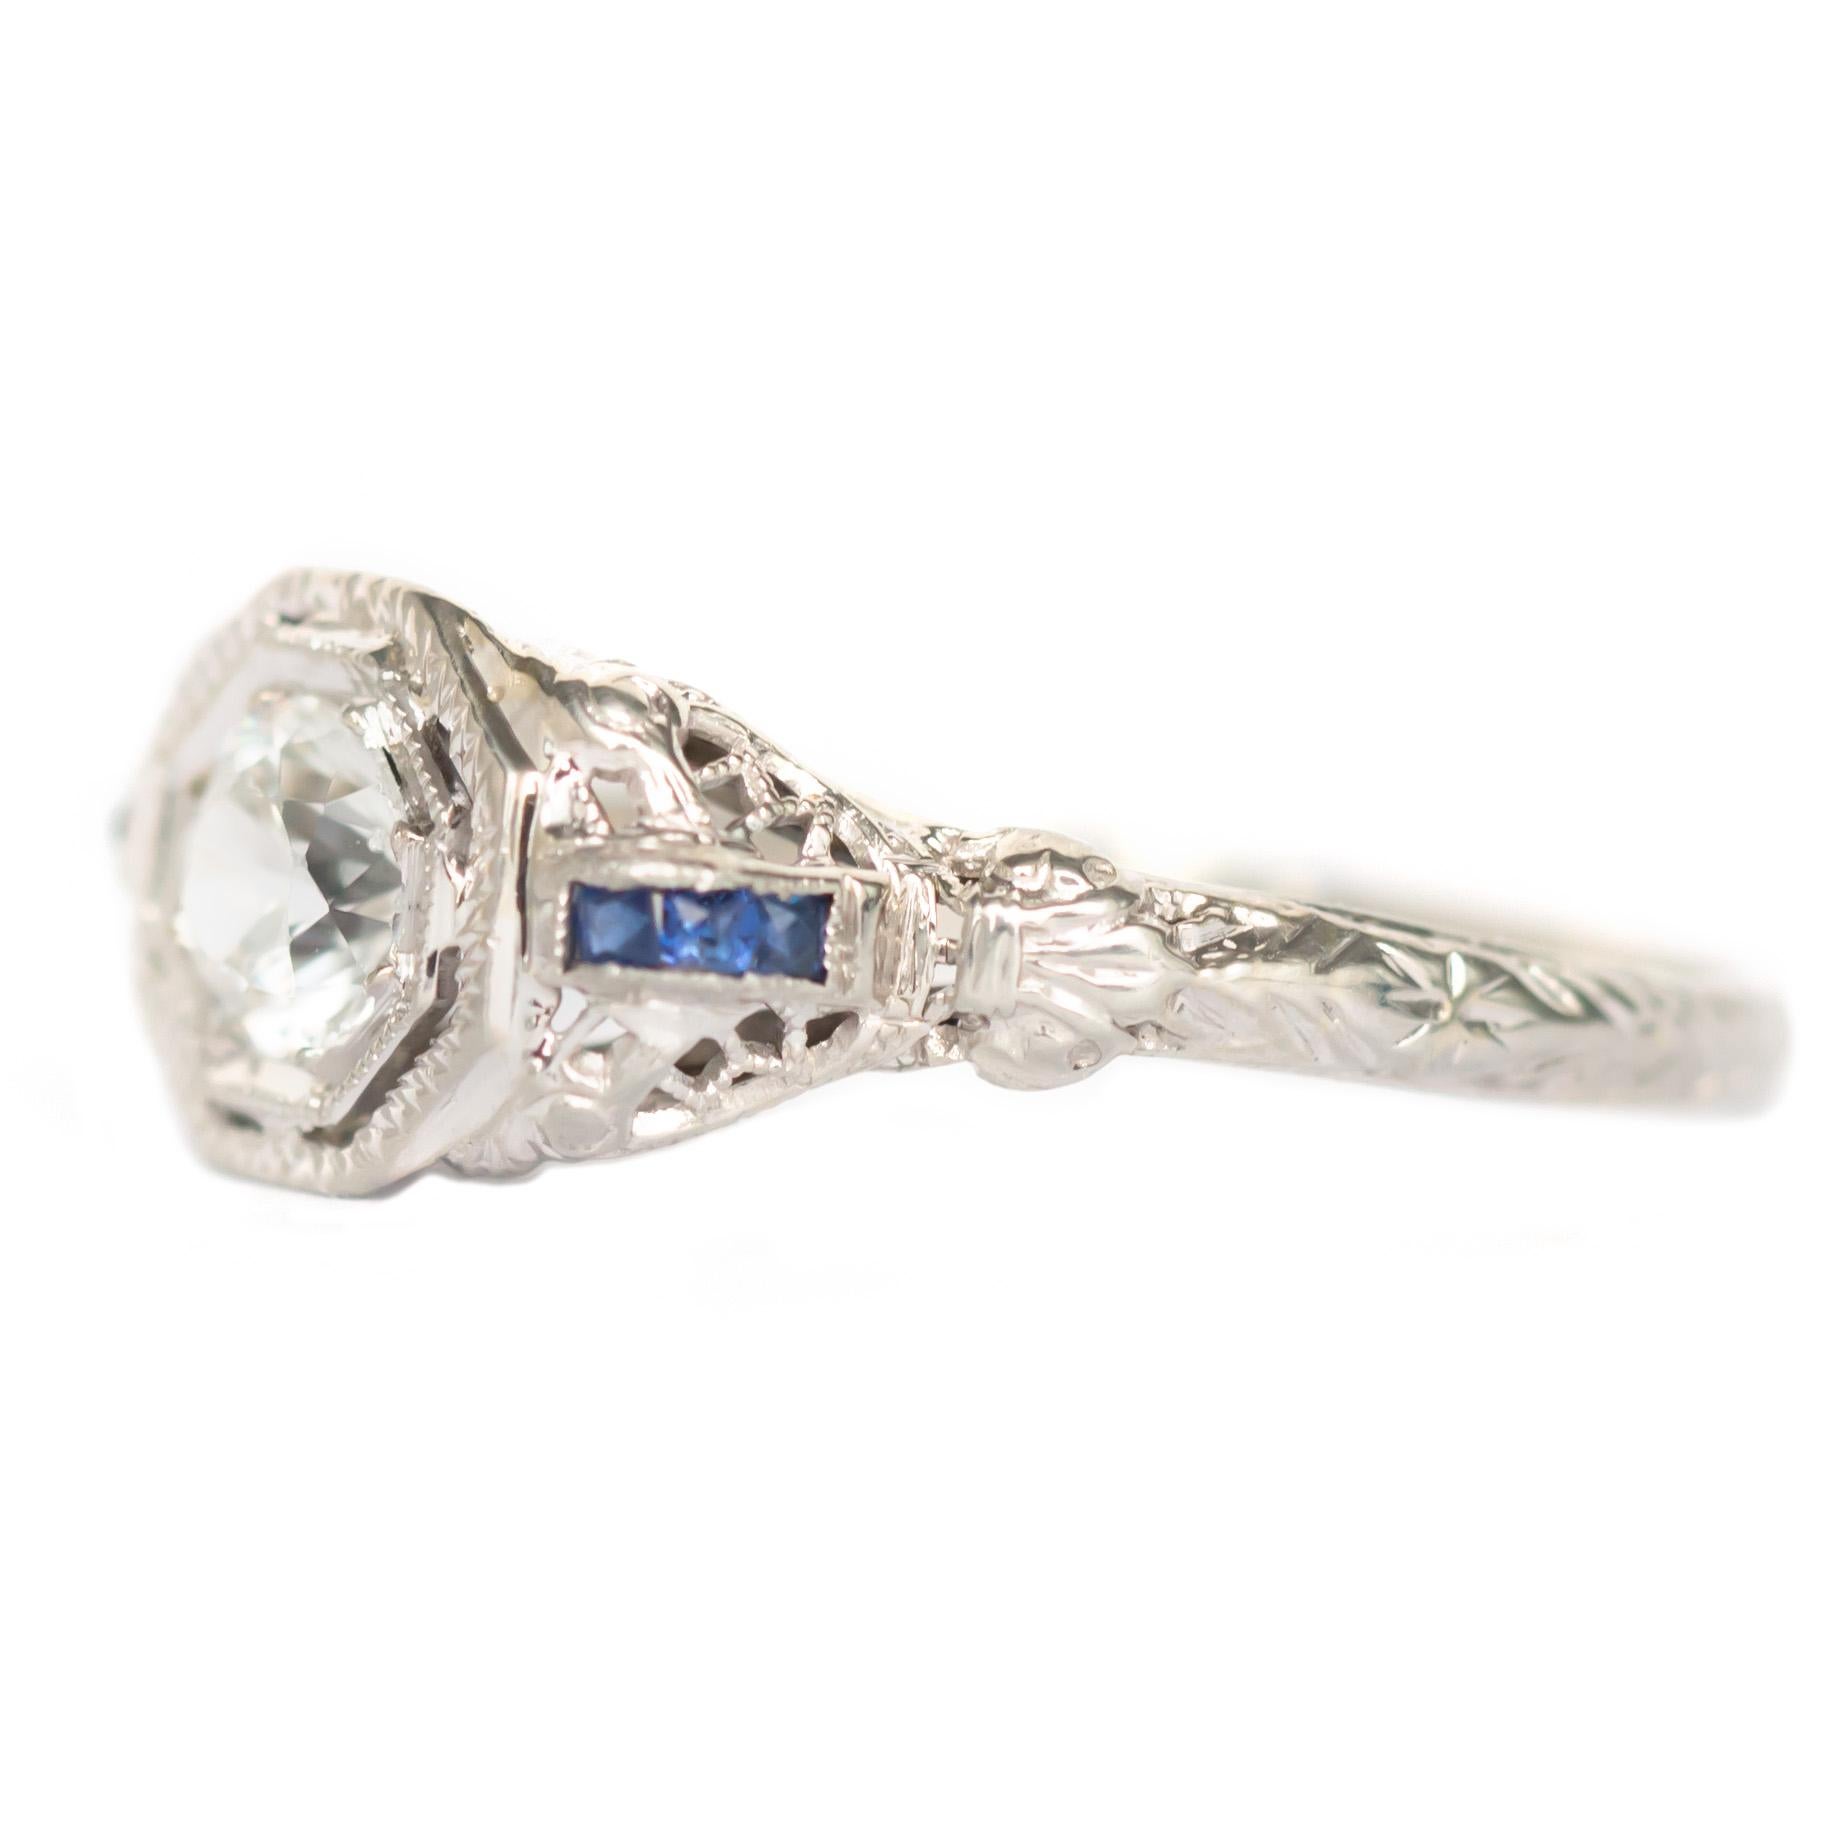 Item Details: 
Ring Size: 8.5
Metal Type: 18 Karat White Gold 
Weight: 2.5 grams

Center Diamond Details
Shape: Old European
Carat Weight: .50 carat
Color: Natural Sapphire

Side Stone Details: 
Type: Sapphire
Shape: French Cut 
Total Carat Weight: